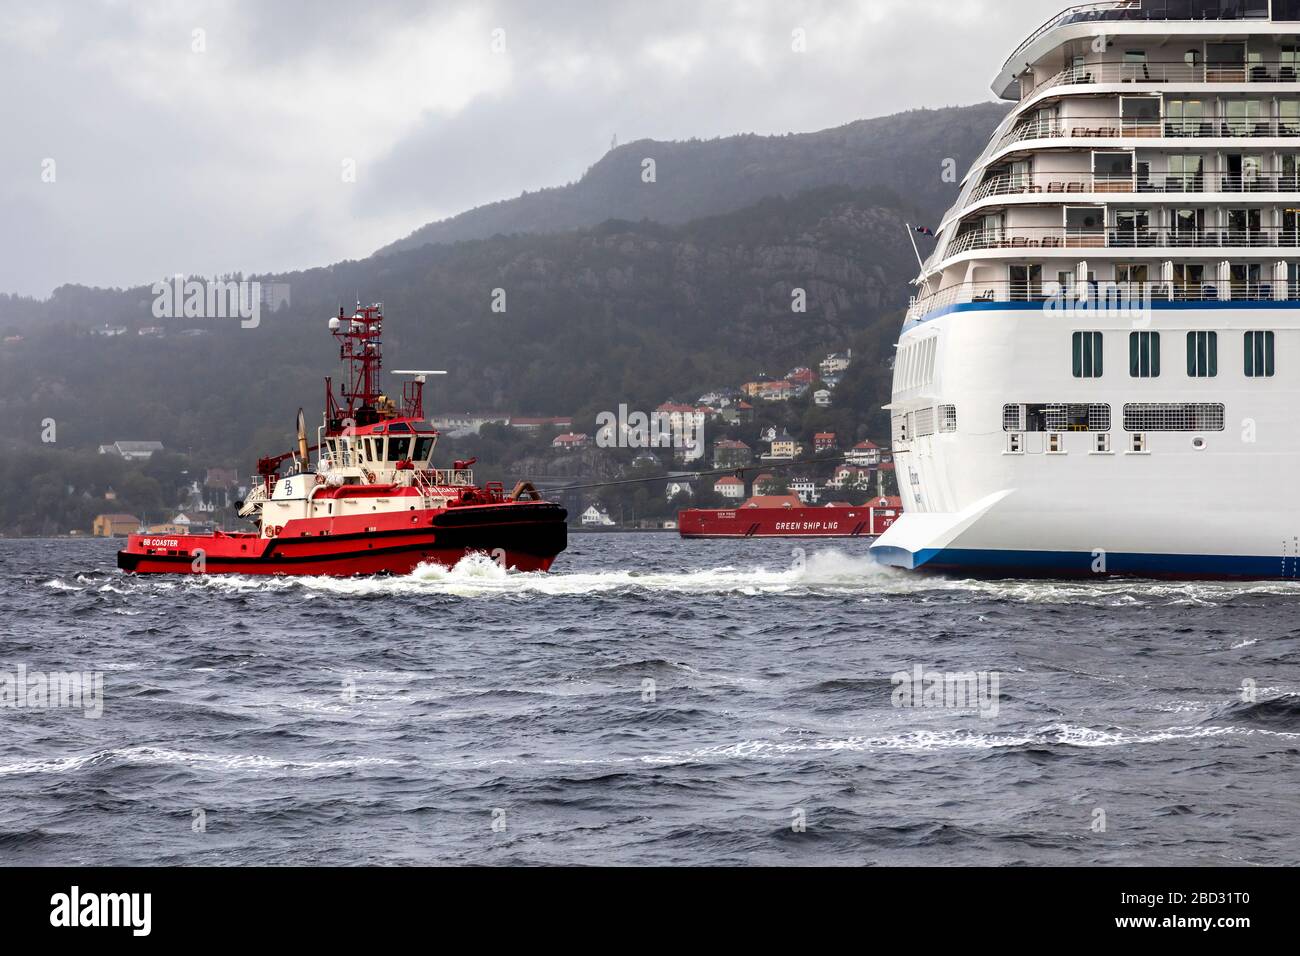 Tug boat BB Coaster assisting a large cruise ship to depart from the port of Bergen, Norway. A rainy and foggy day Stock Photo